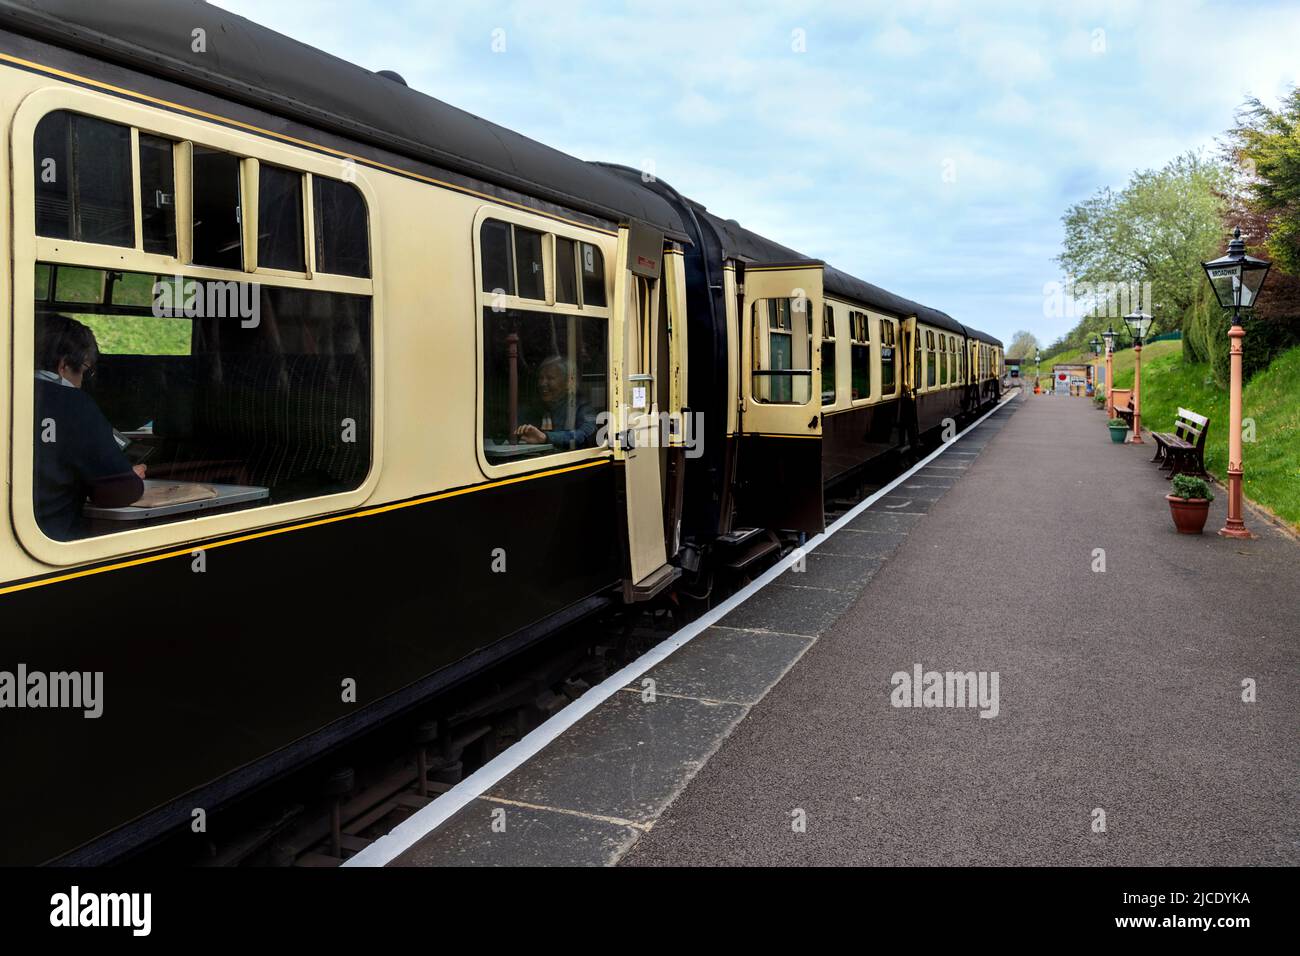 Vintage steam train of the Gloucestershire Warwickshire Steam Railway at The Old station House, Broadway, Gloucestershire, England, United Kingdom. Stock Photo